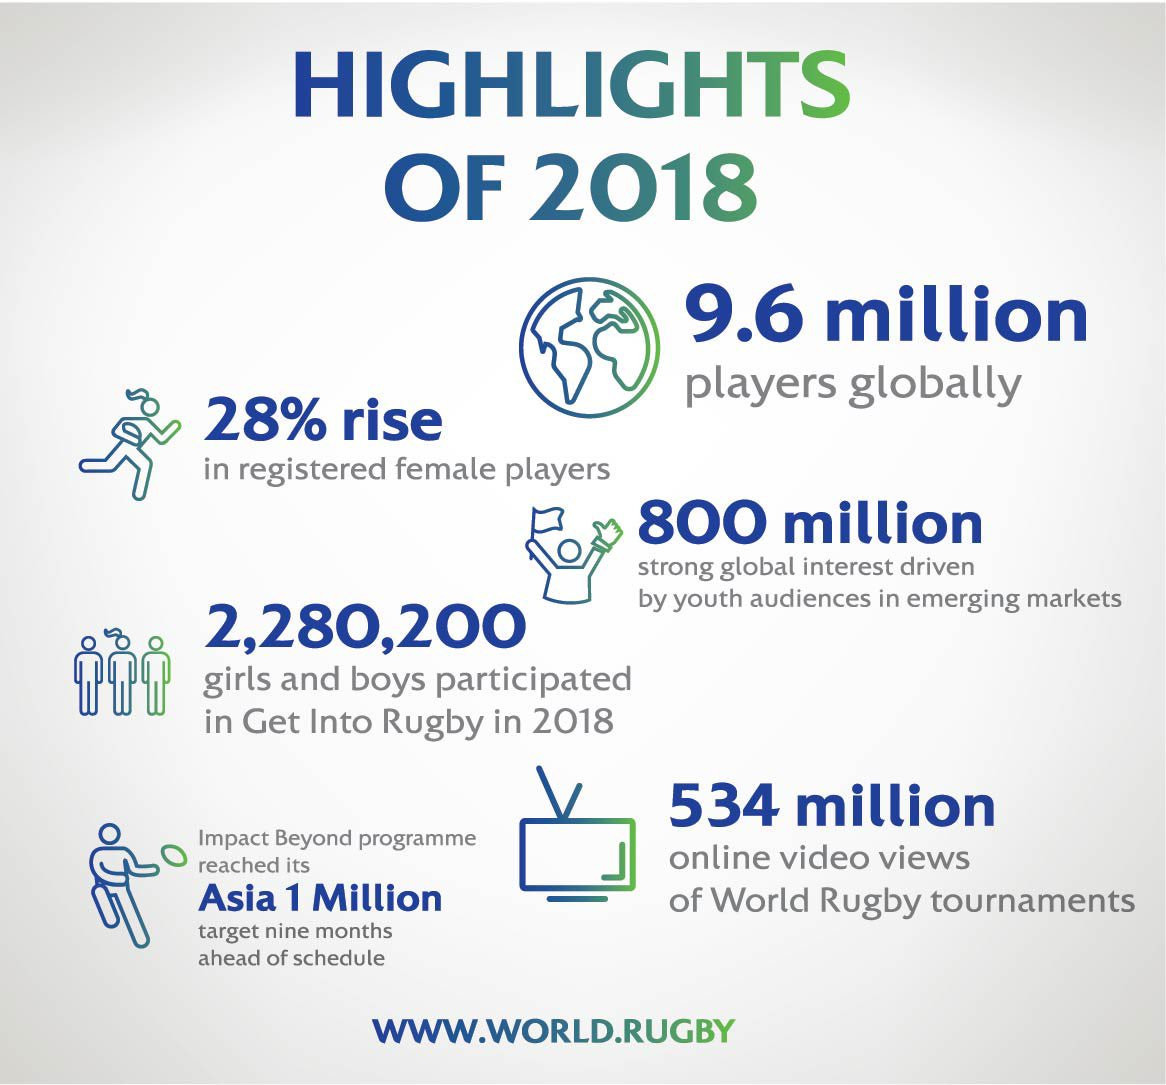 World Rugby has documented its highlights of 2018 ©World Rugby